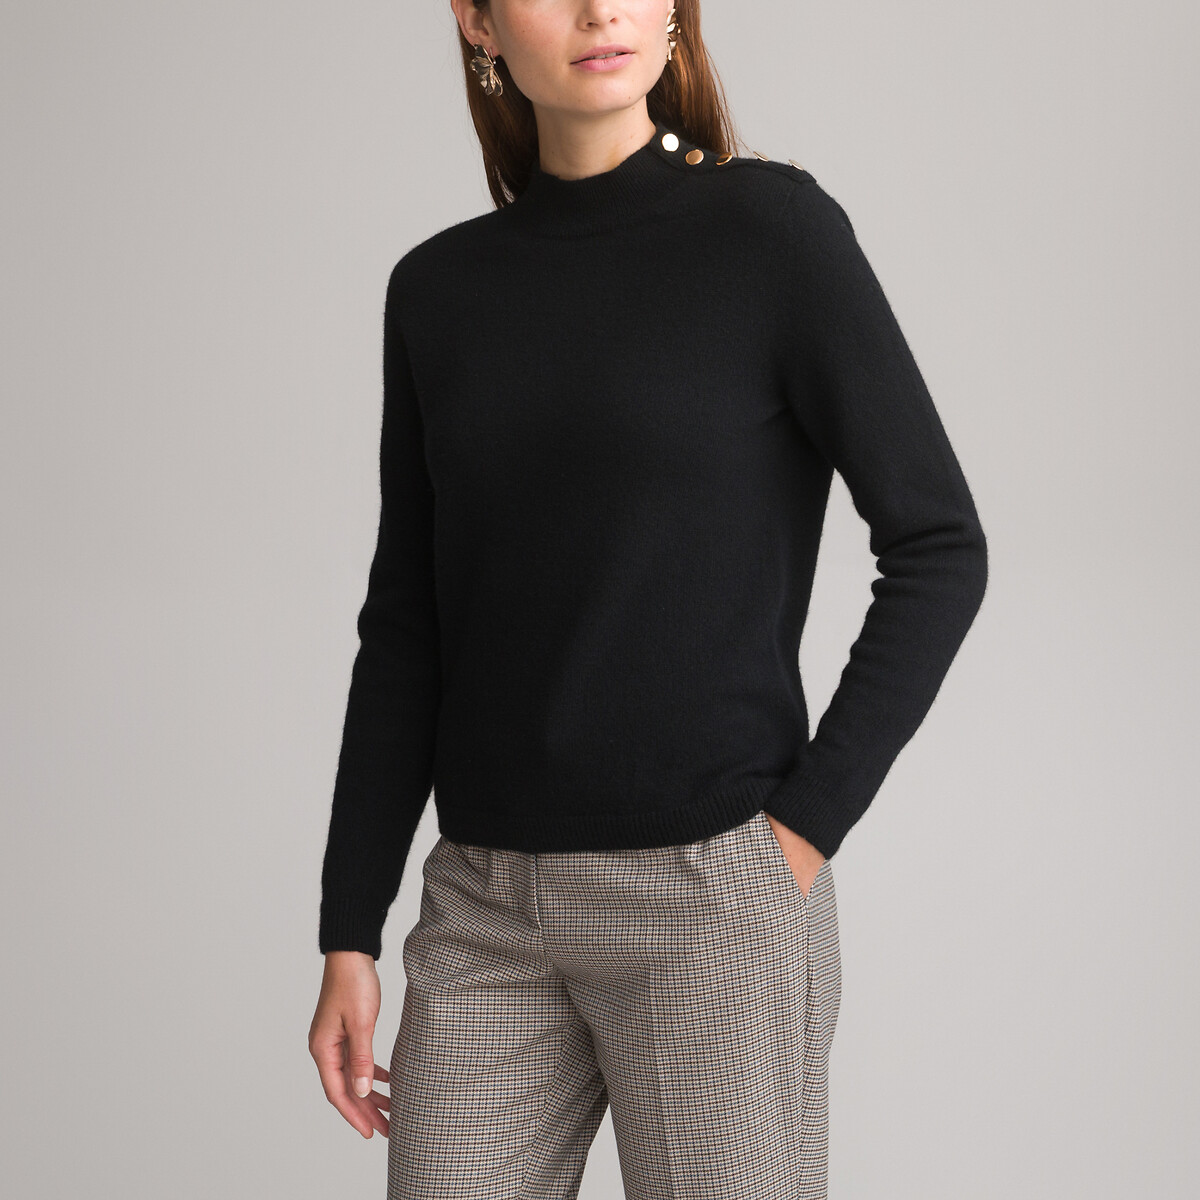 Wool/cashmere jumper in fine knit with high neck Anne Weyburn | La Redoute